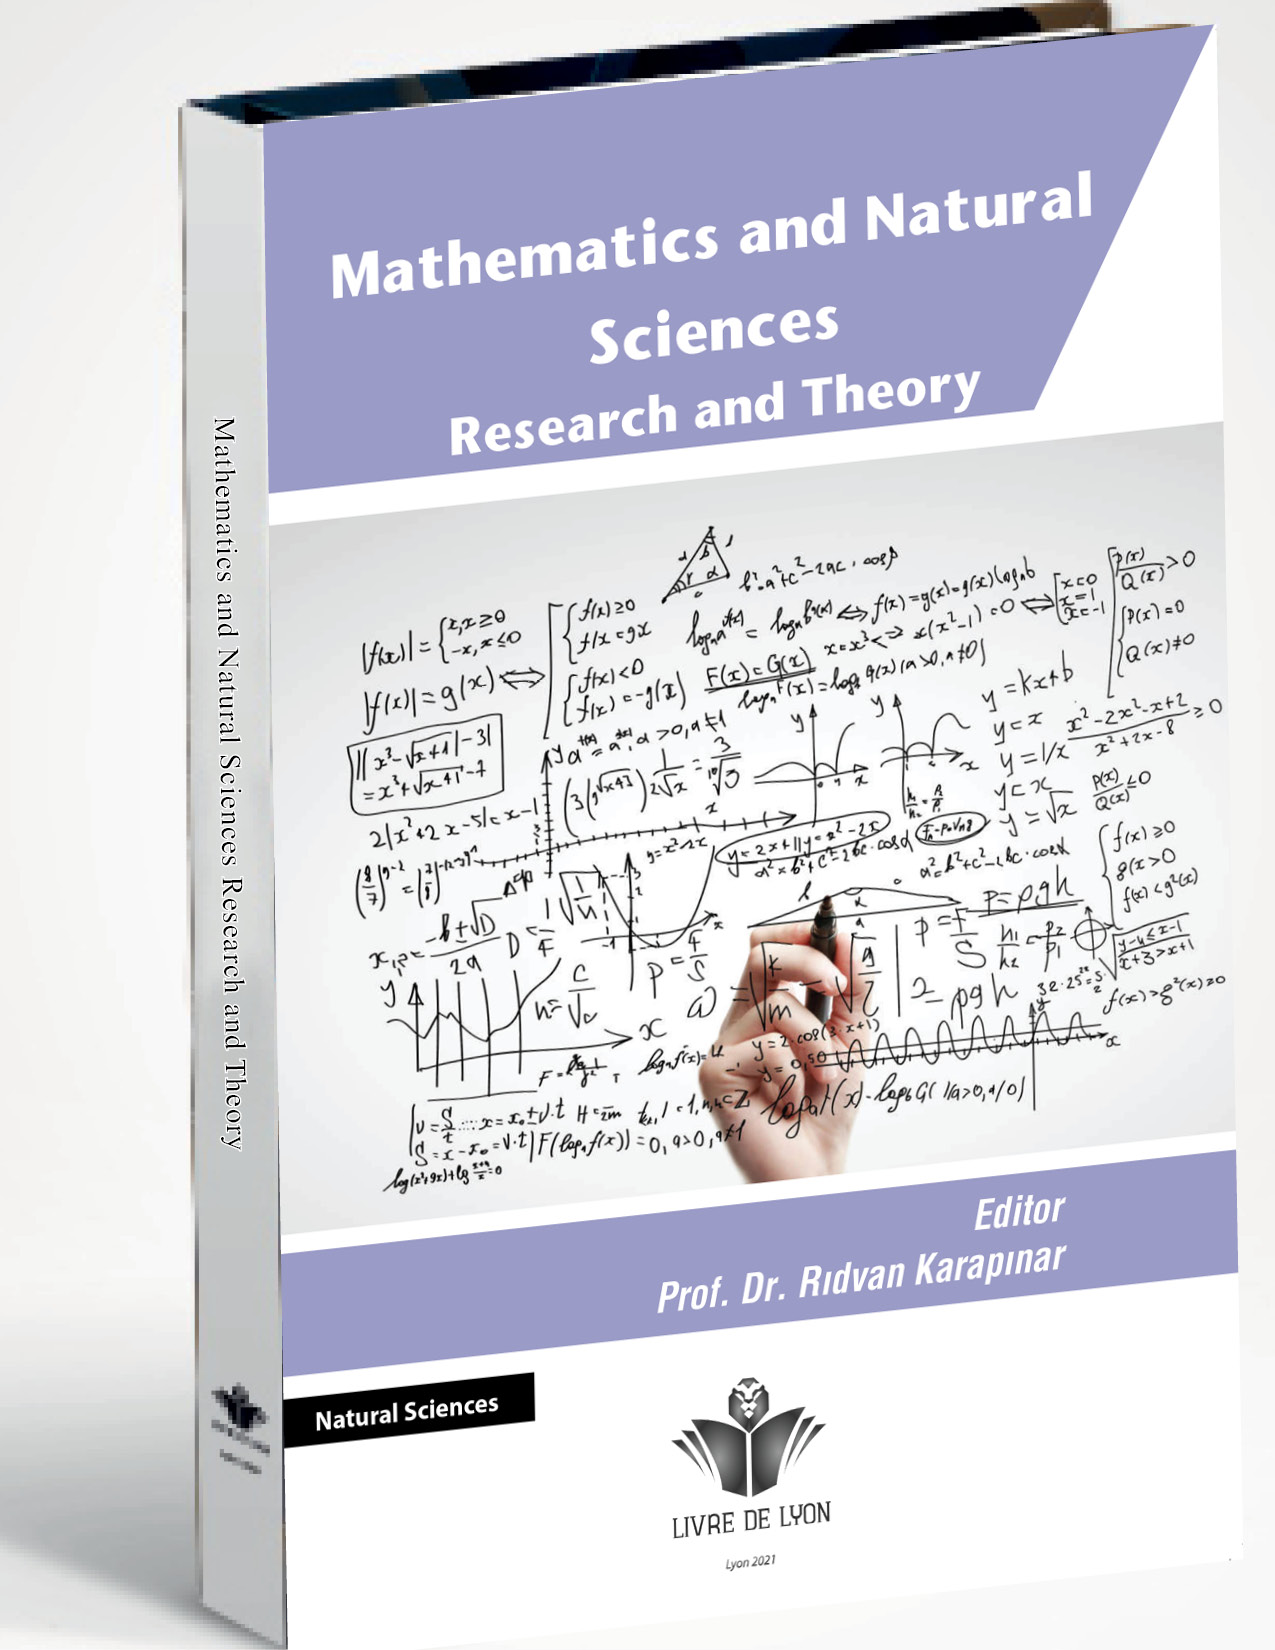 Mathematics and Natural Sciences Research and Theory